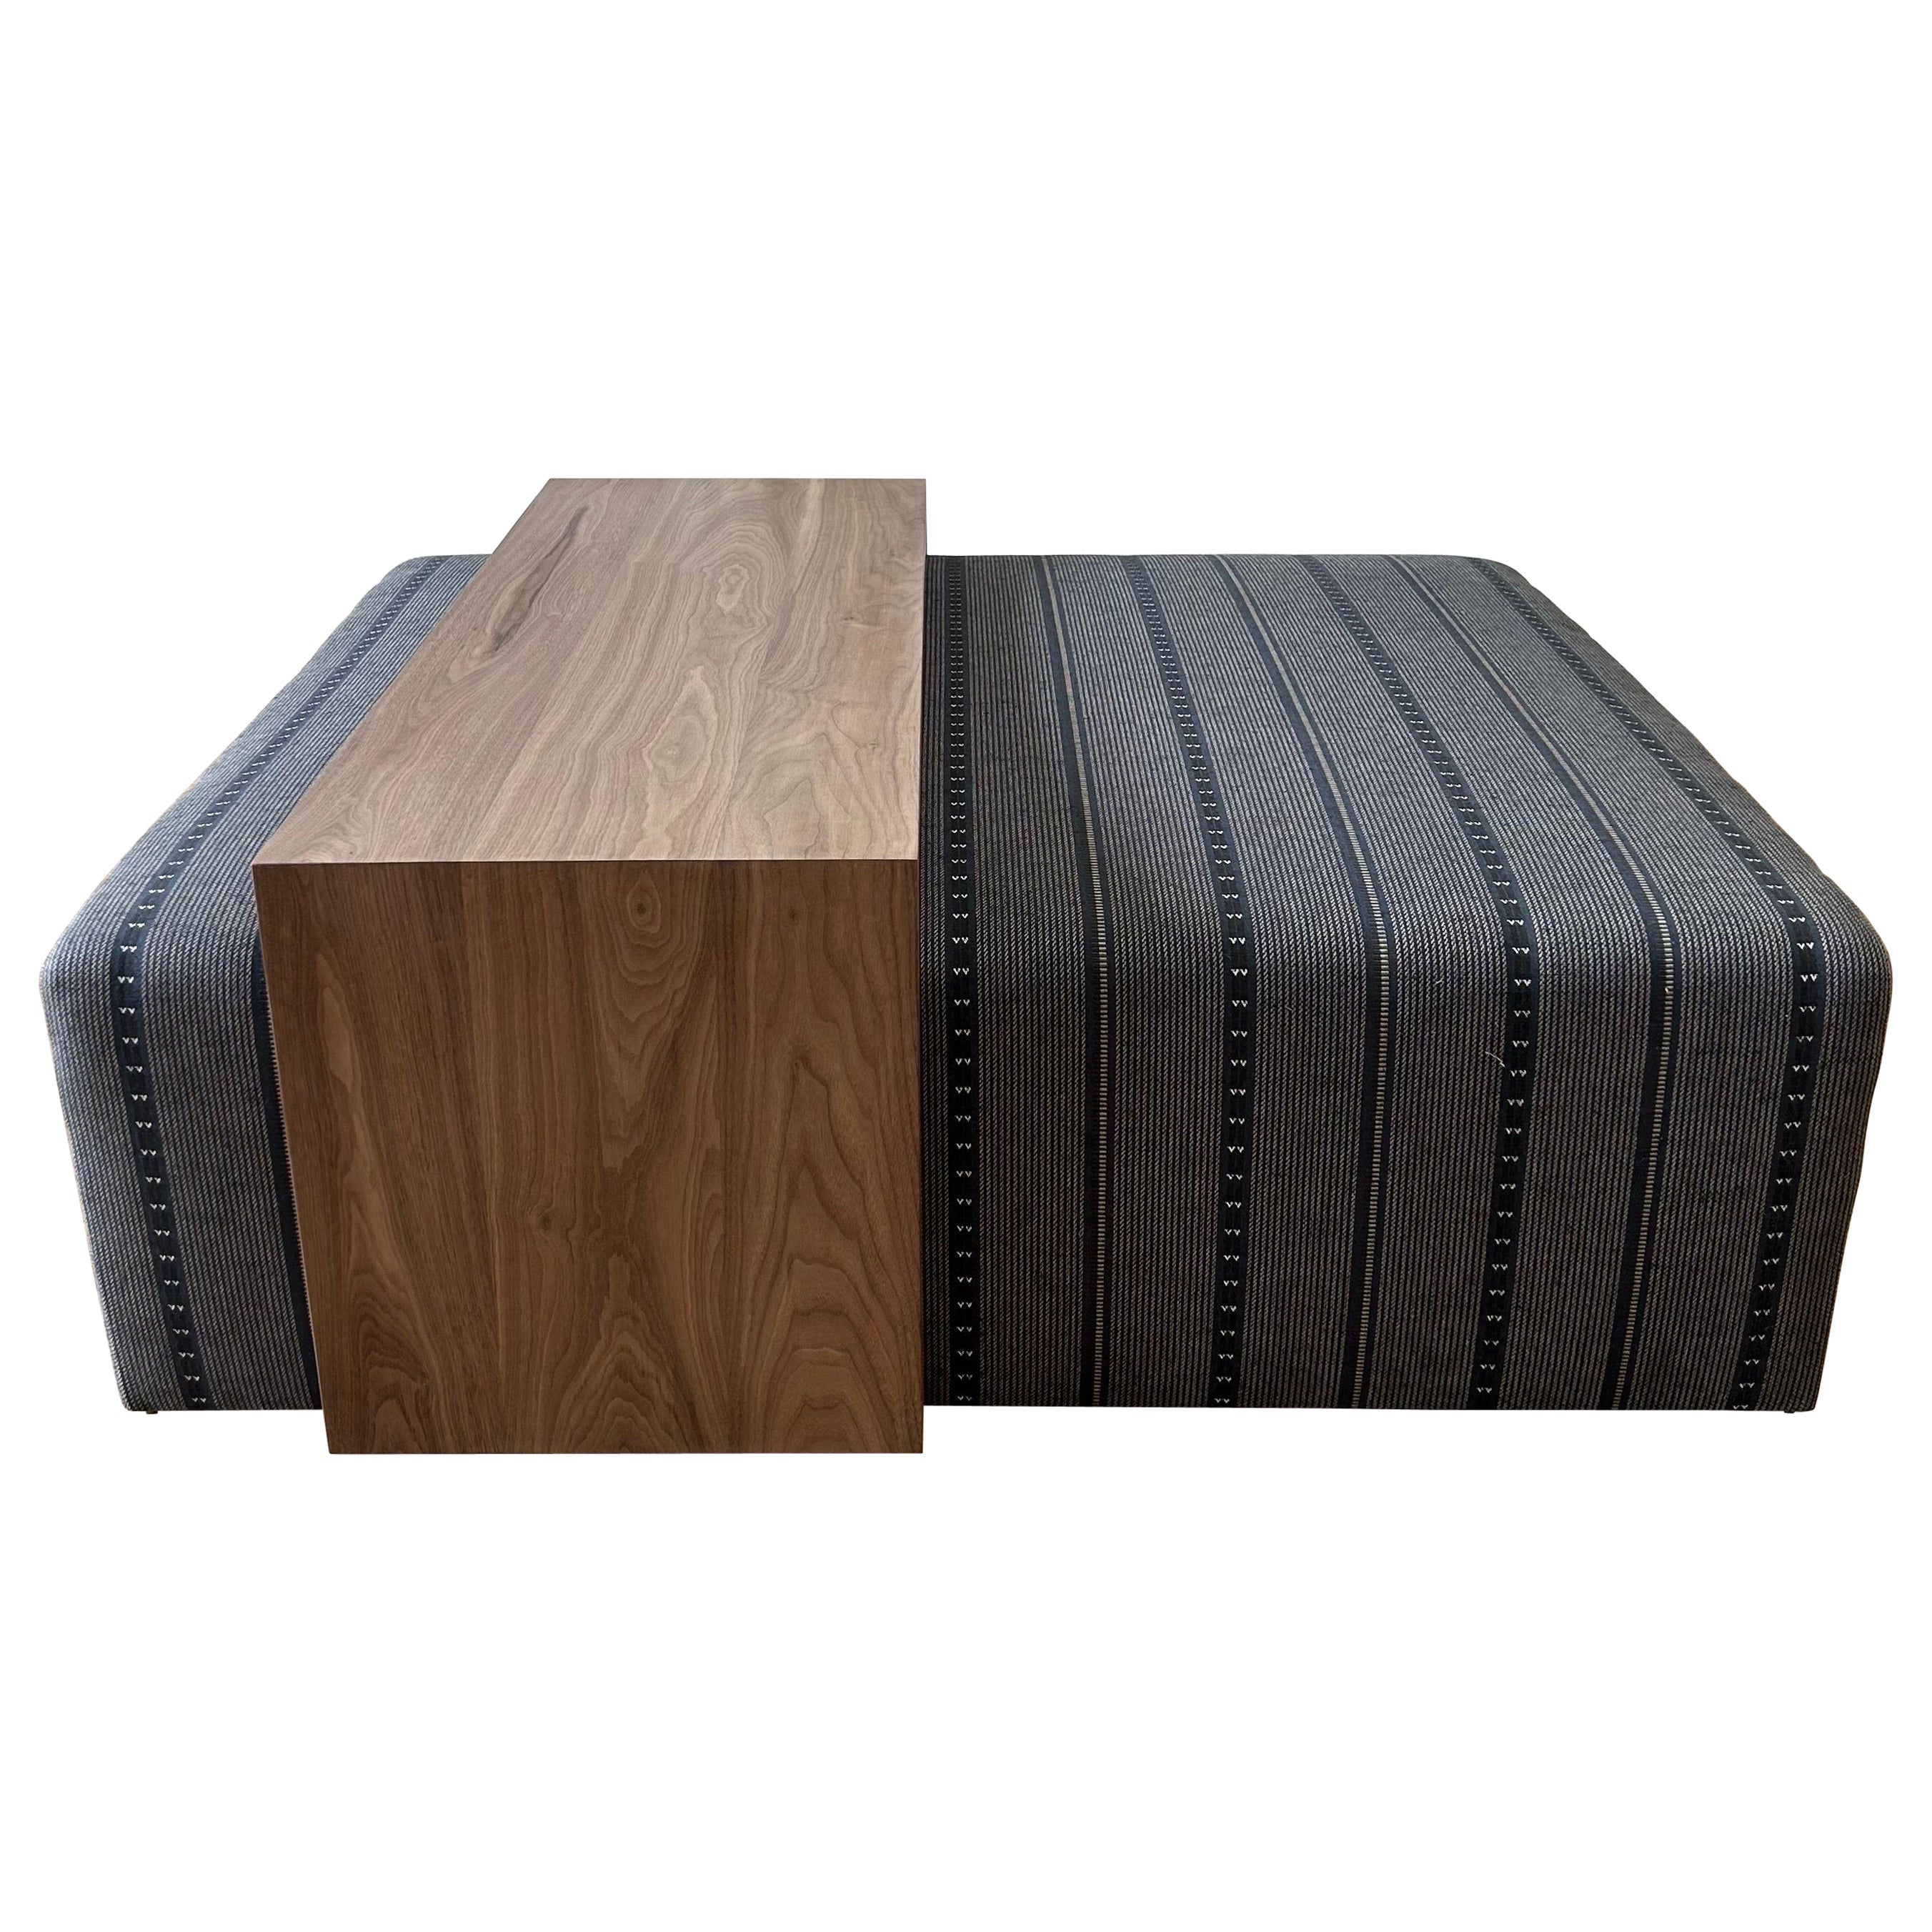 Custom Made Wool and Jute Cube Ottoman with Walnut Waterfall Style Table